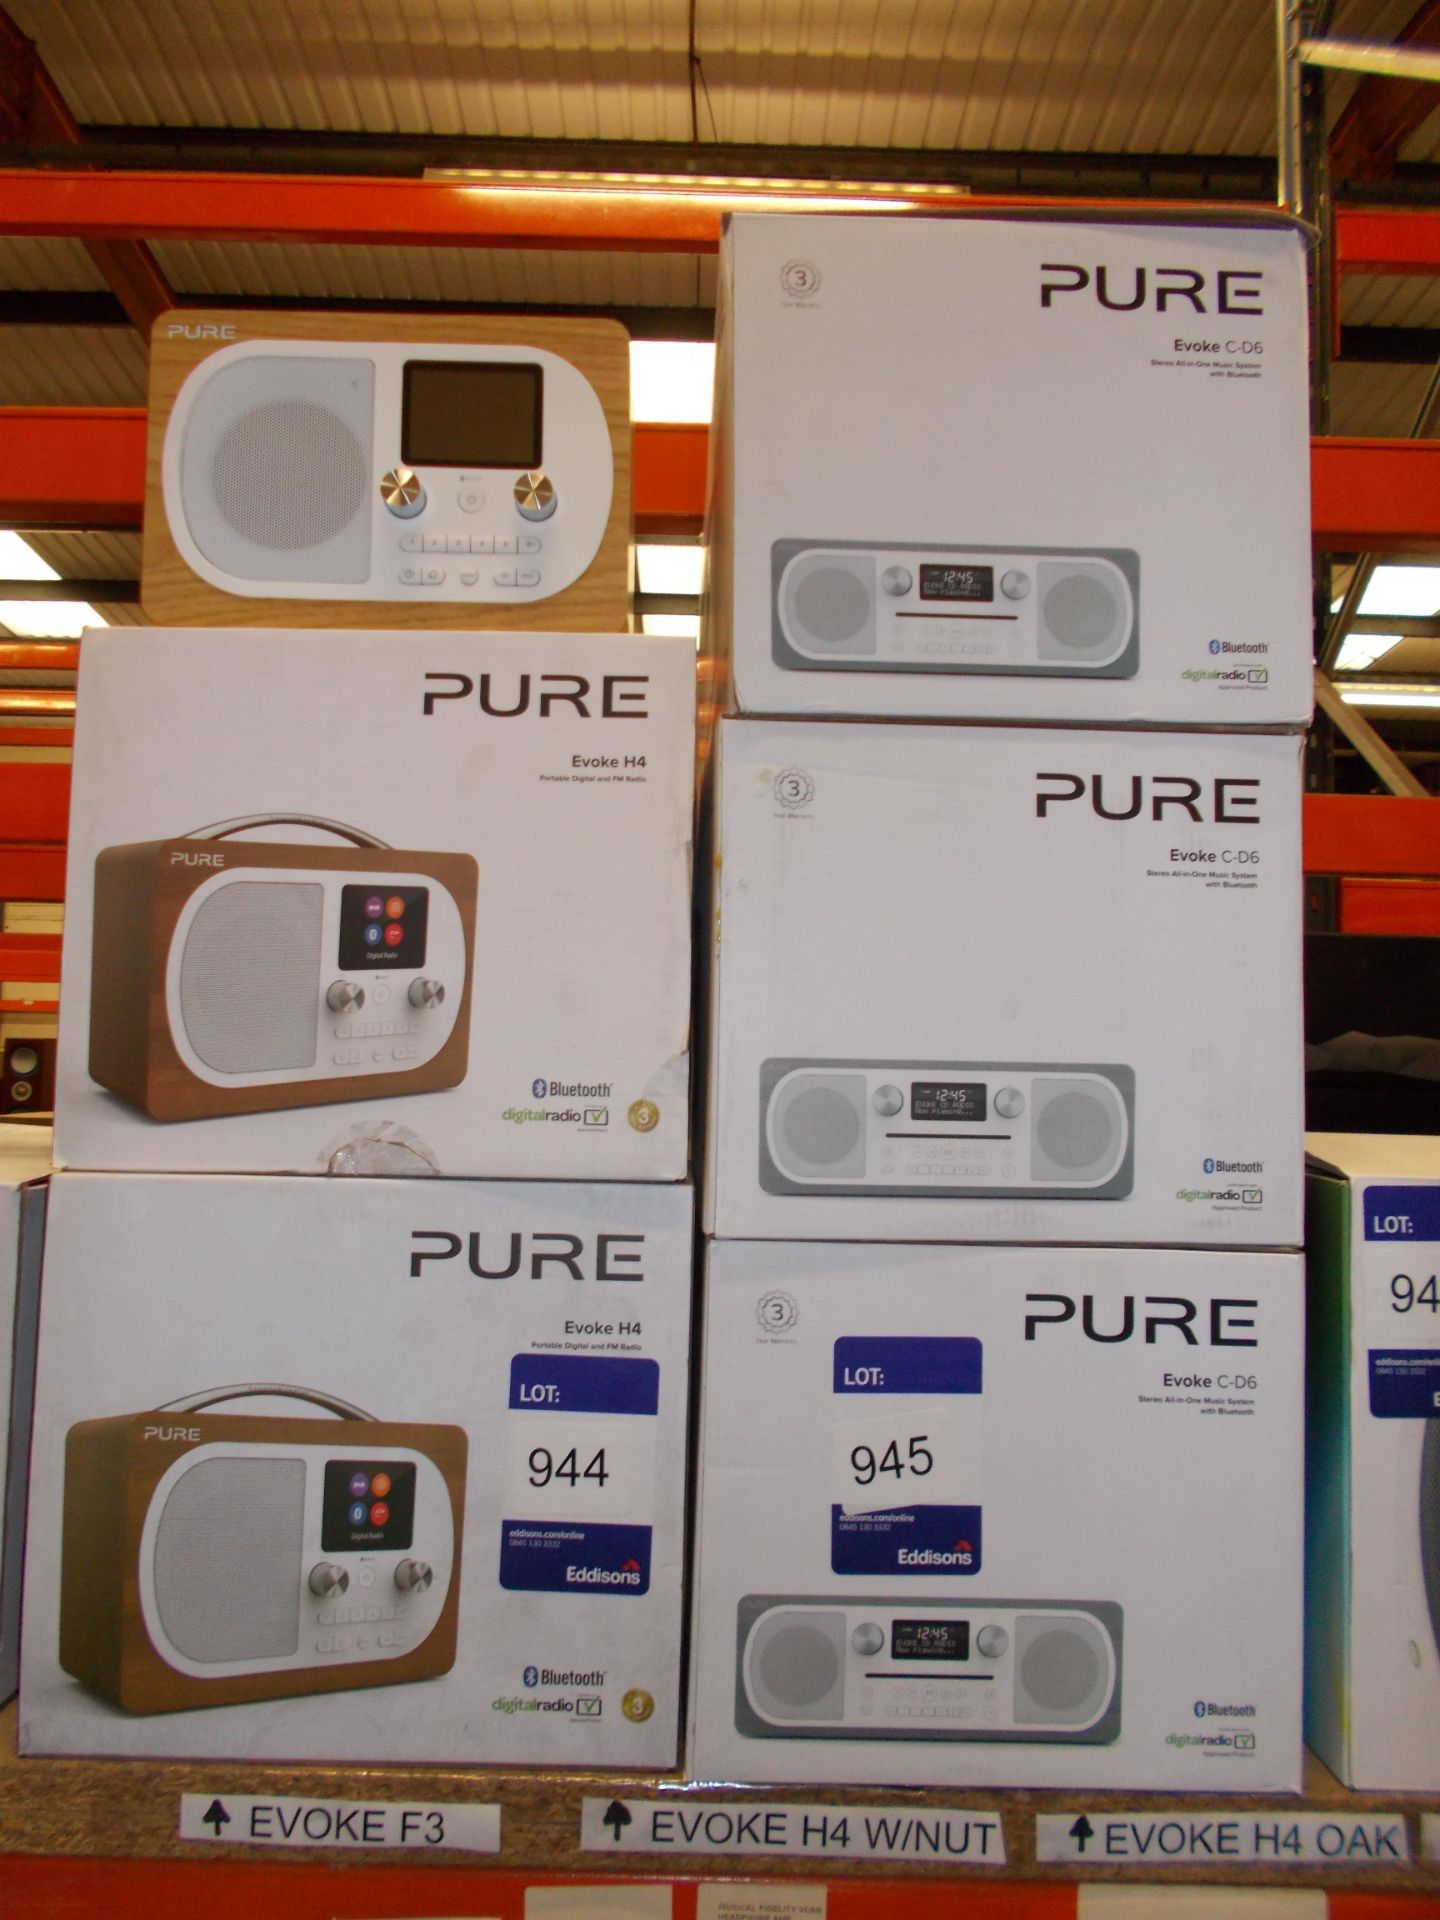 2x Pure Evoque H4 Portable Digital and FM Radio (1x on display & 1x boxed) – RRP £150 each